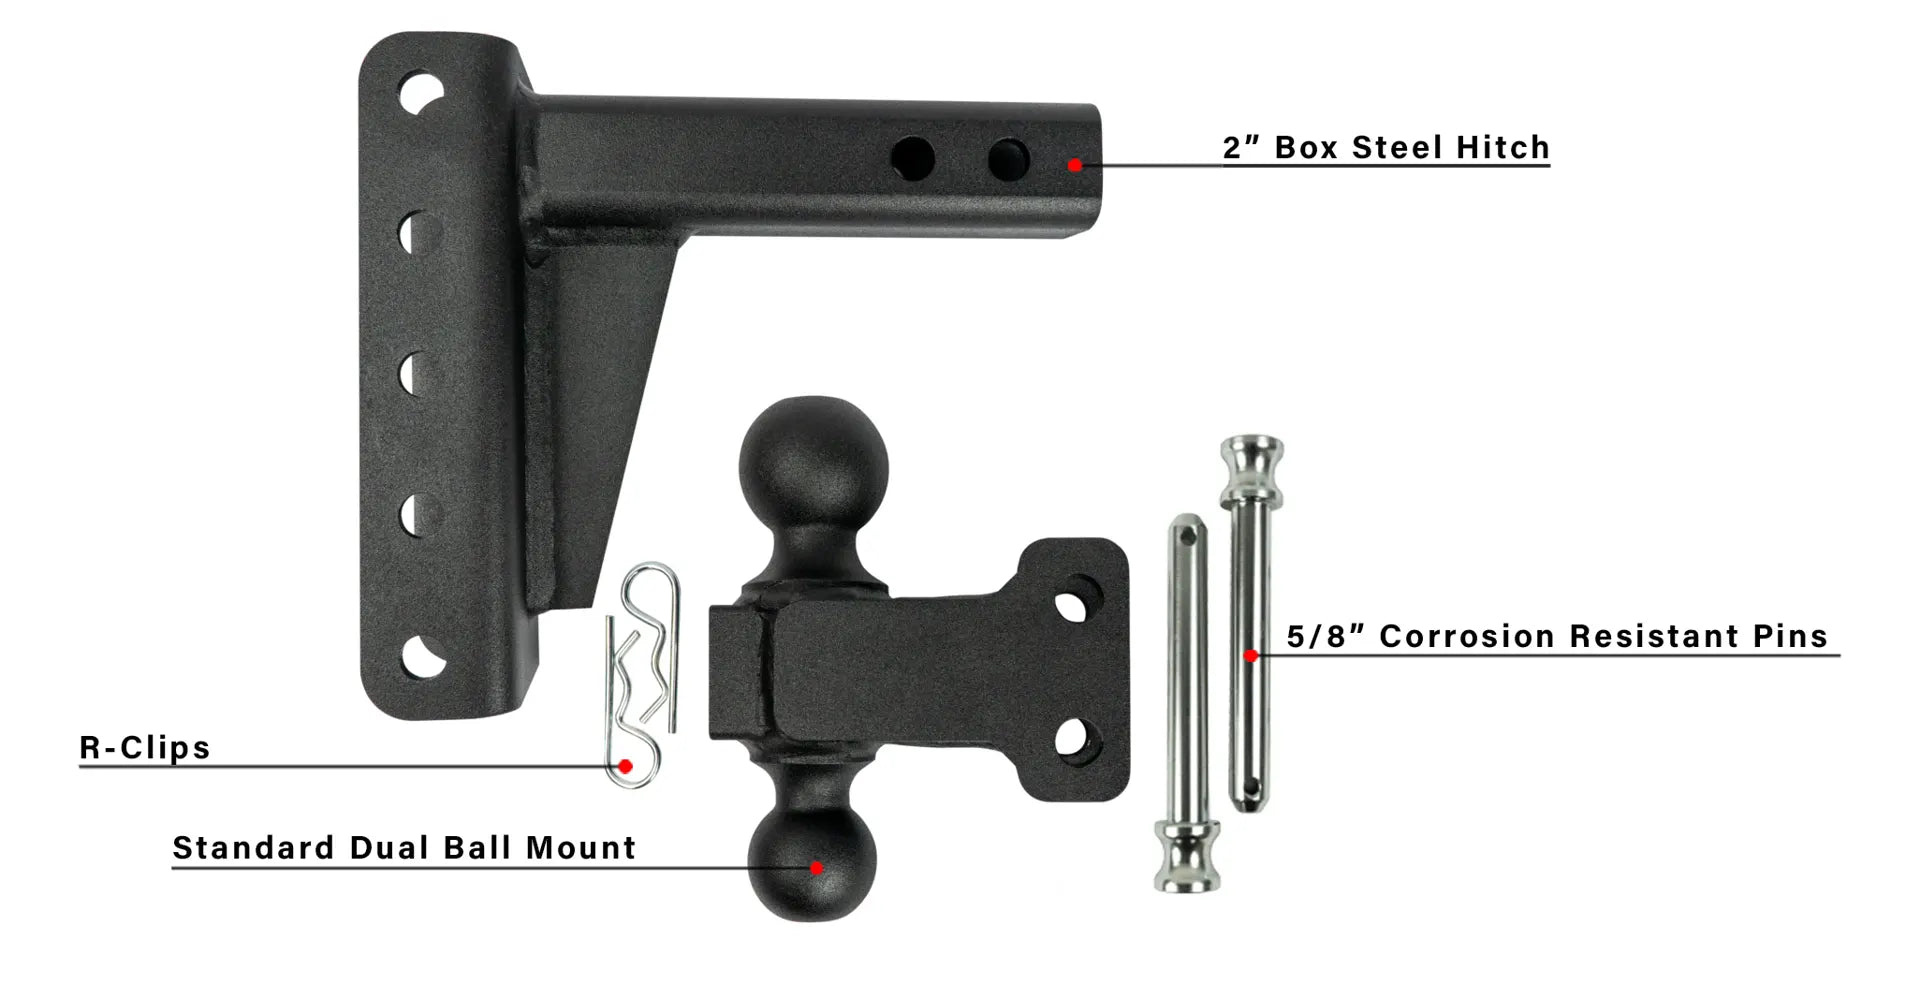 2.0" Medium Duty 4" Drop/Rise Hitch Included Parts